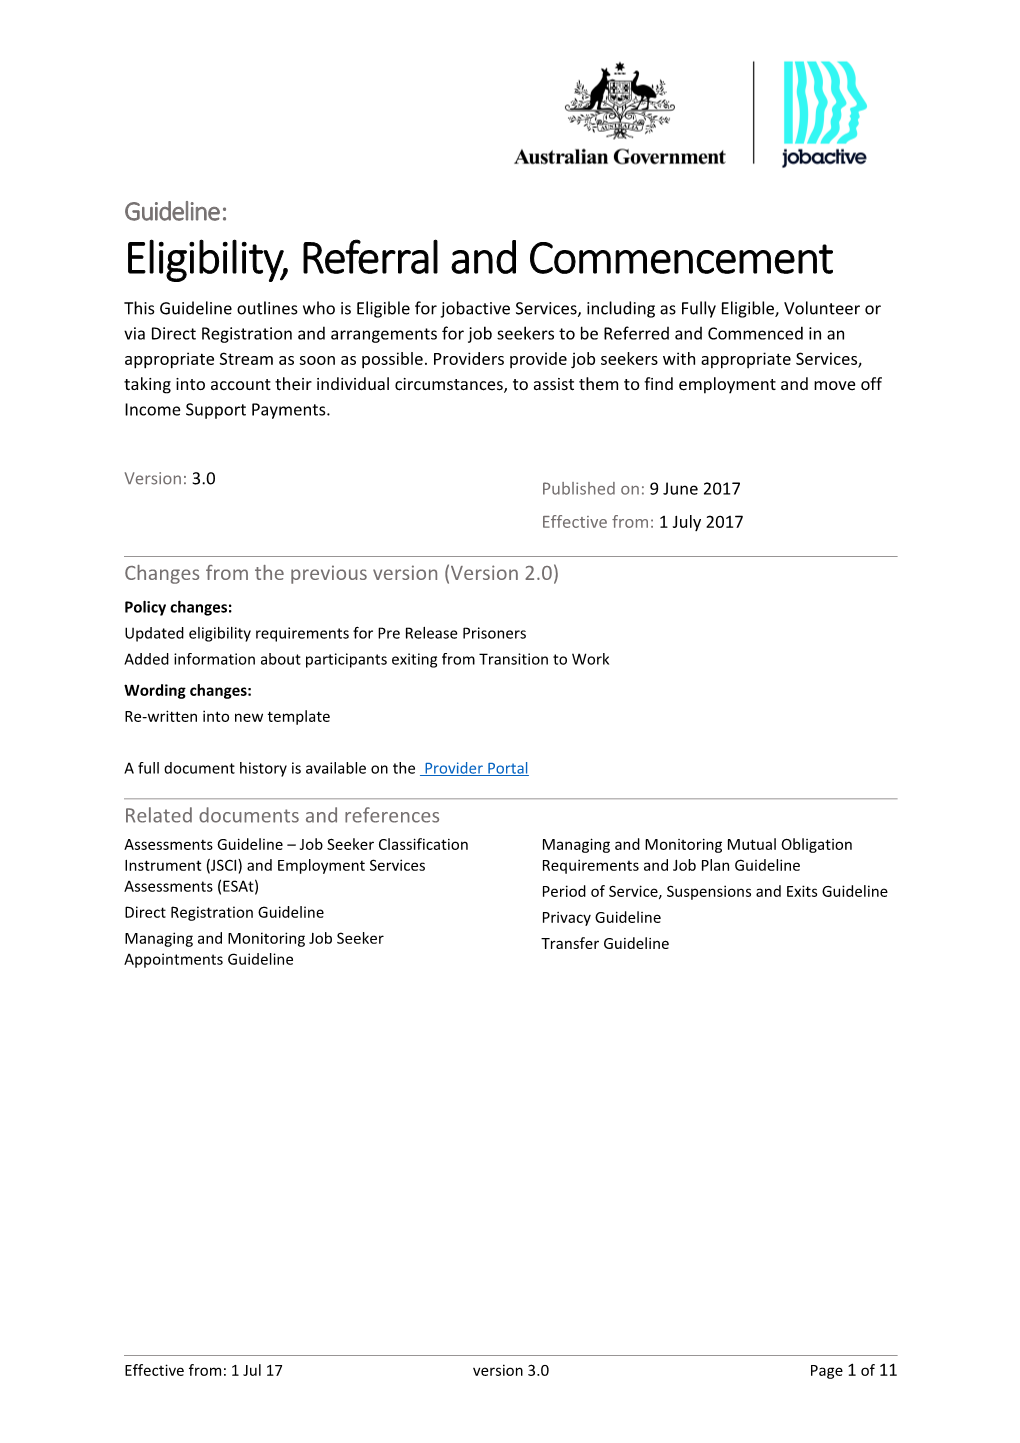 Jobactive Guideline Eligibility, Referral and Commencement